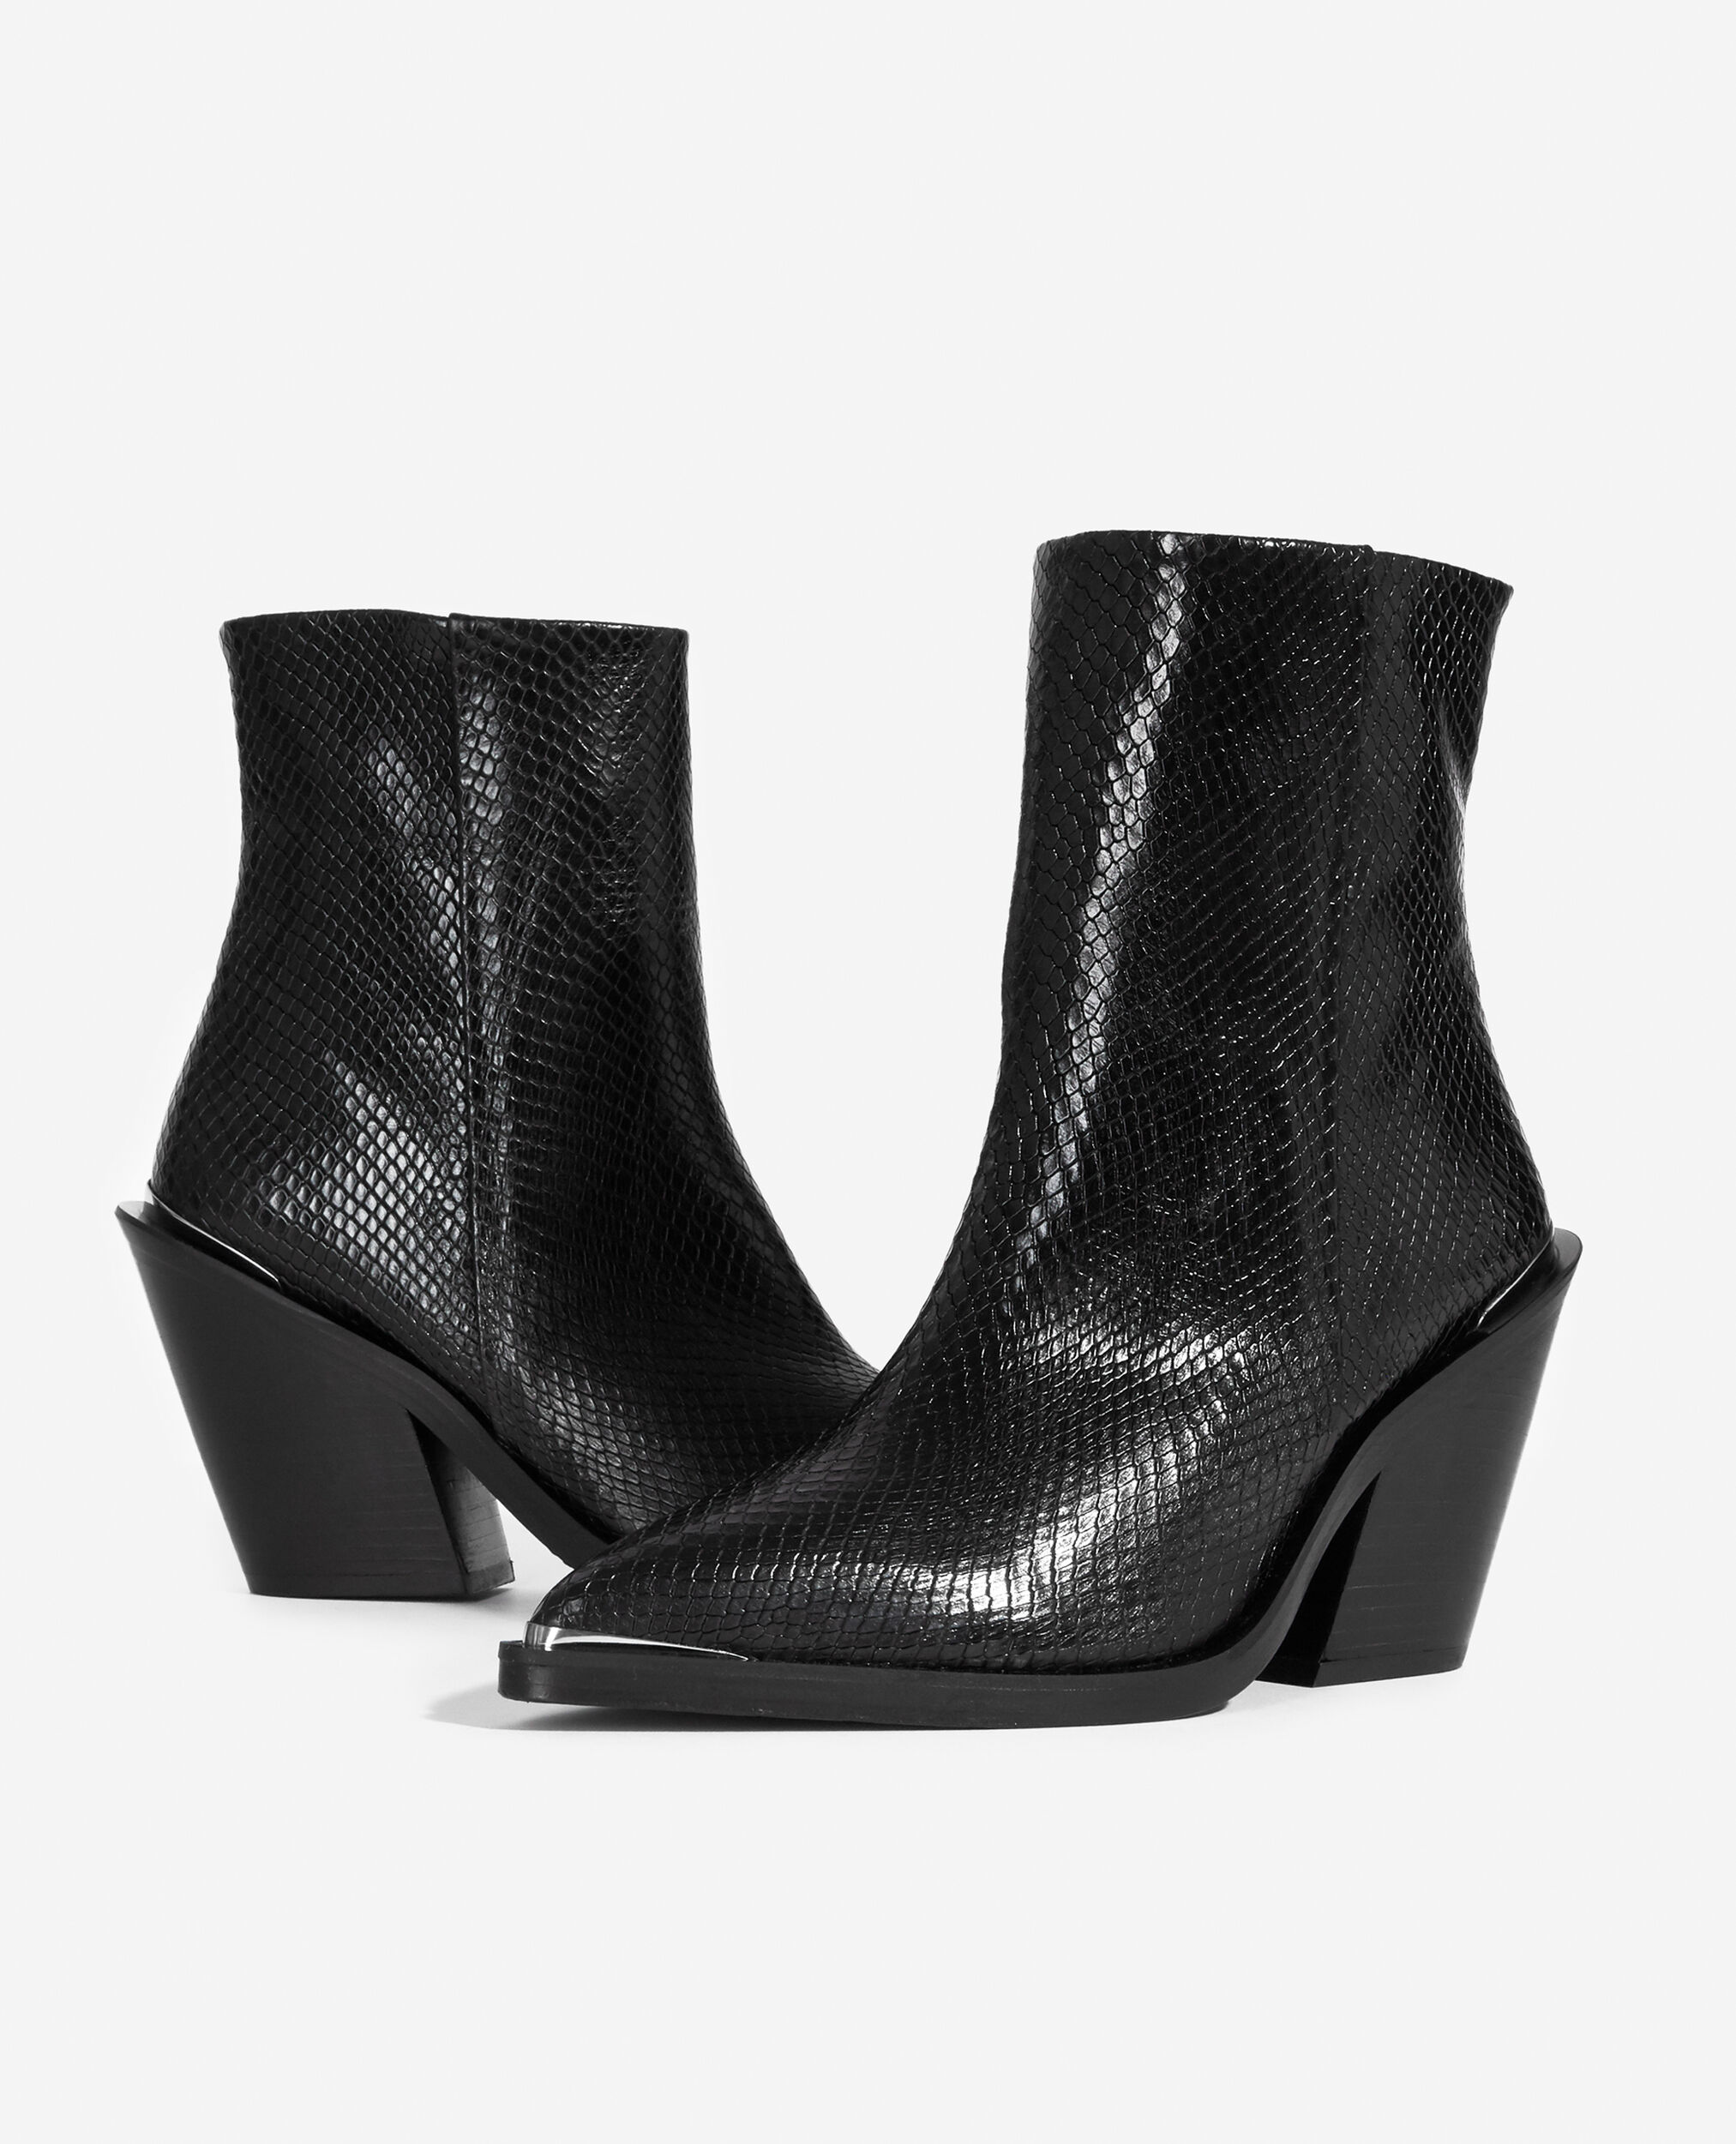 Heeled ankle boots in snake-effect leather, BLACK, hi-res image number null